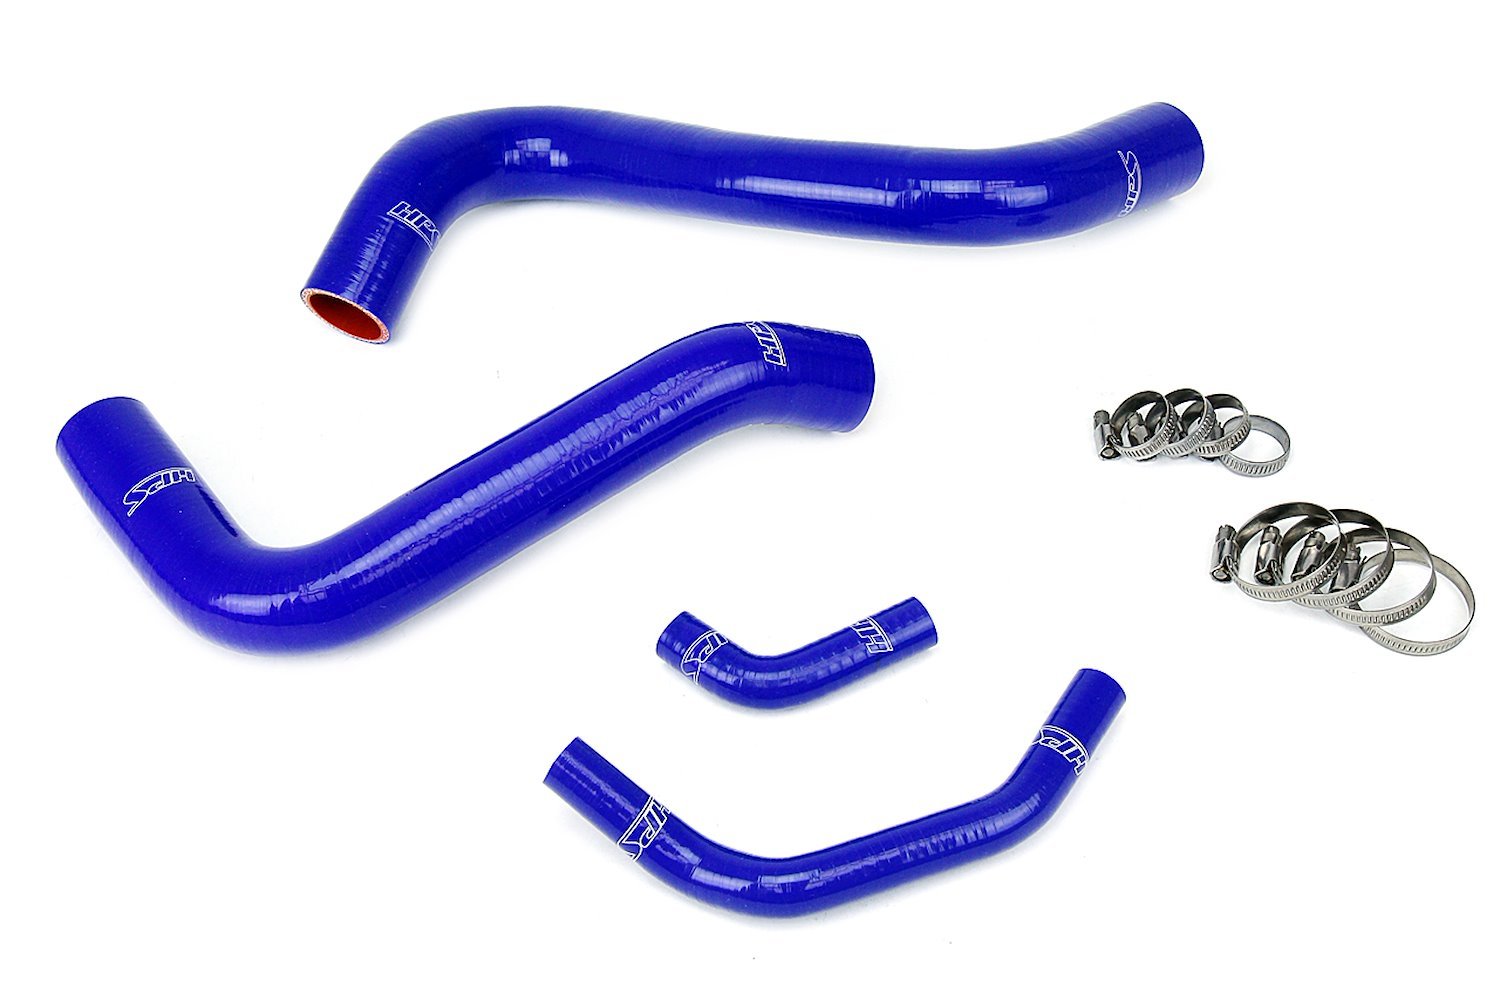 57-1467R-BLUE Radiator Hose Kit, High-Temp 3-Ply Reinforced Silicone, Replace OEM Rubber Radiator Coolant Hoses